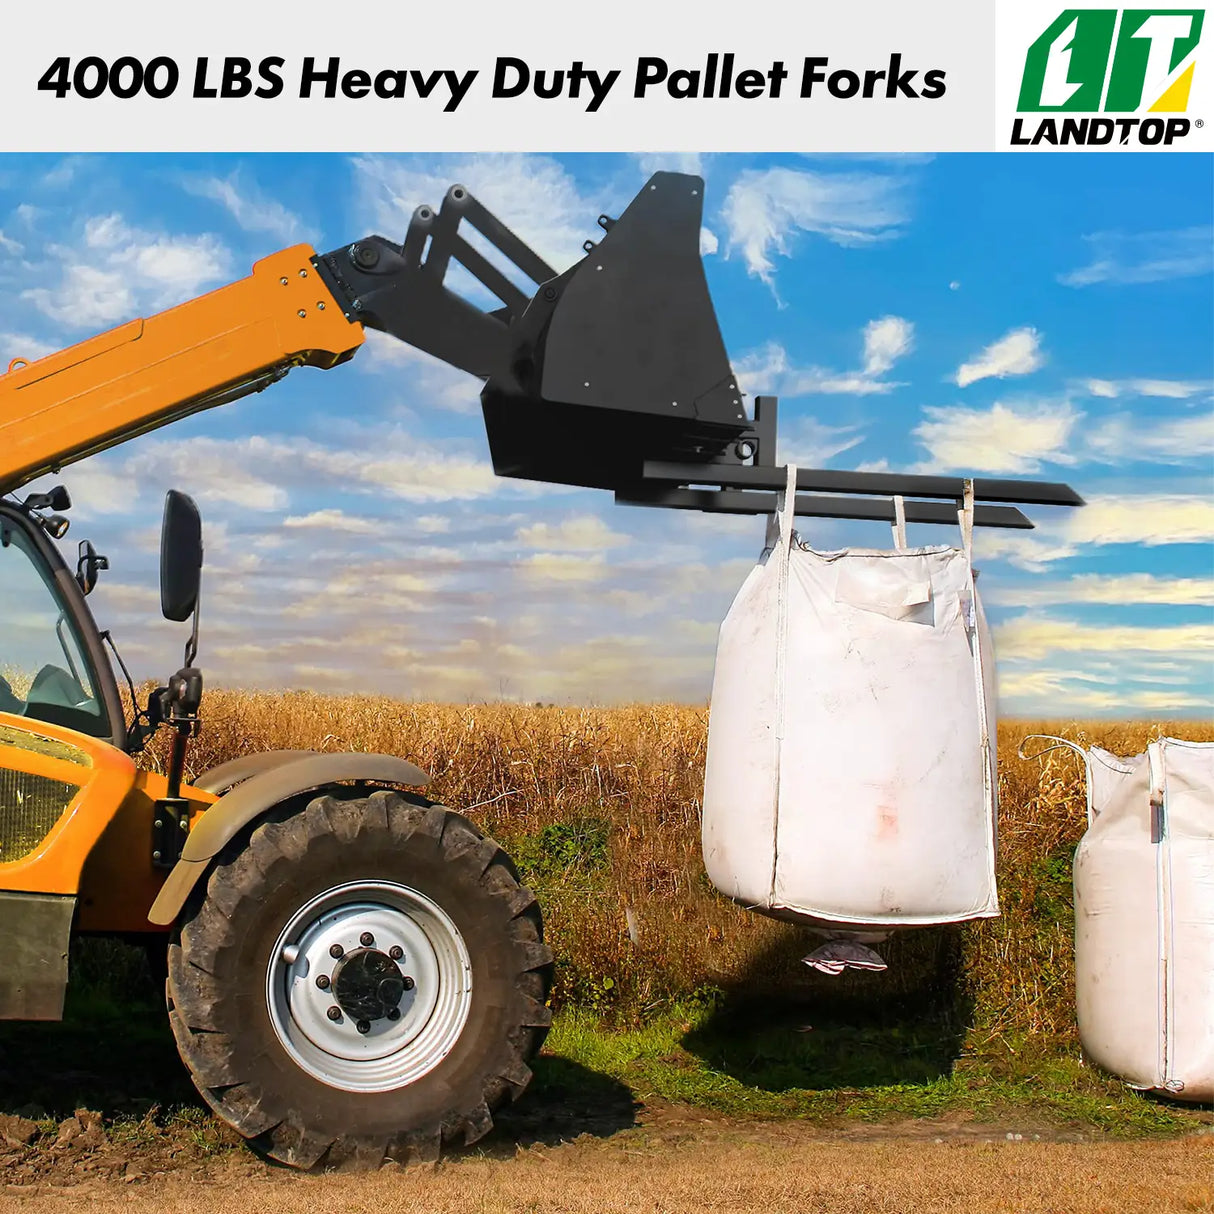 60" 4000lbs Clamp on Pallet Forks Heavy Duty Tractor Forks with Adjustable Stabilizer Bar Tractor Bucket Forks for Tractor Attachments, Skid Steer, Loader Bucket